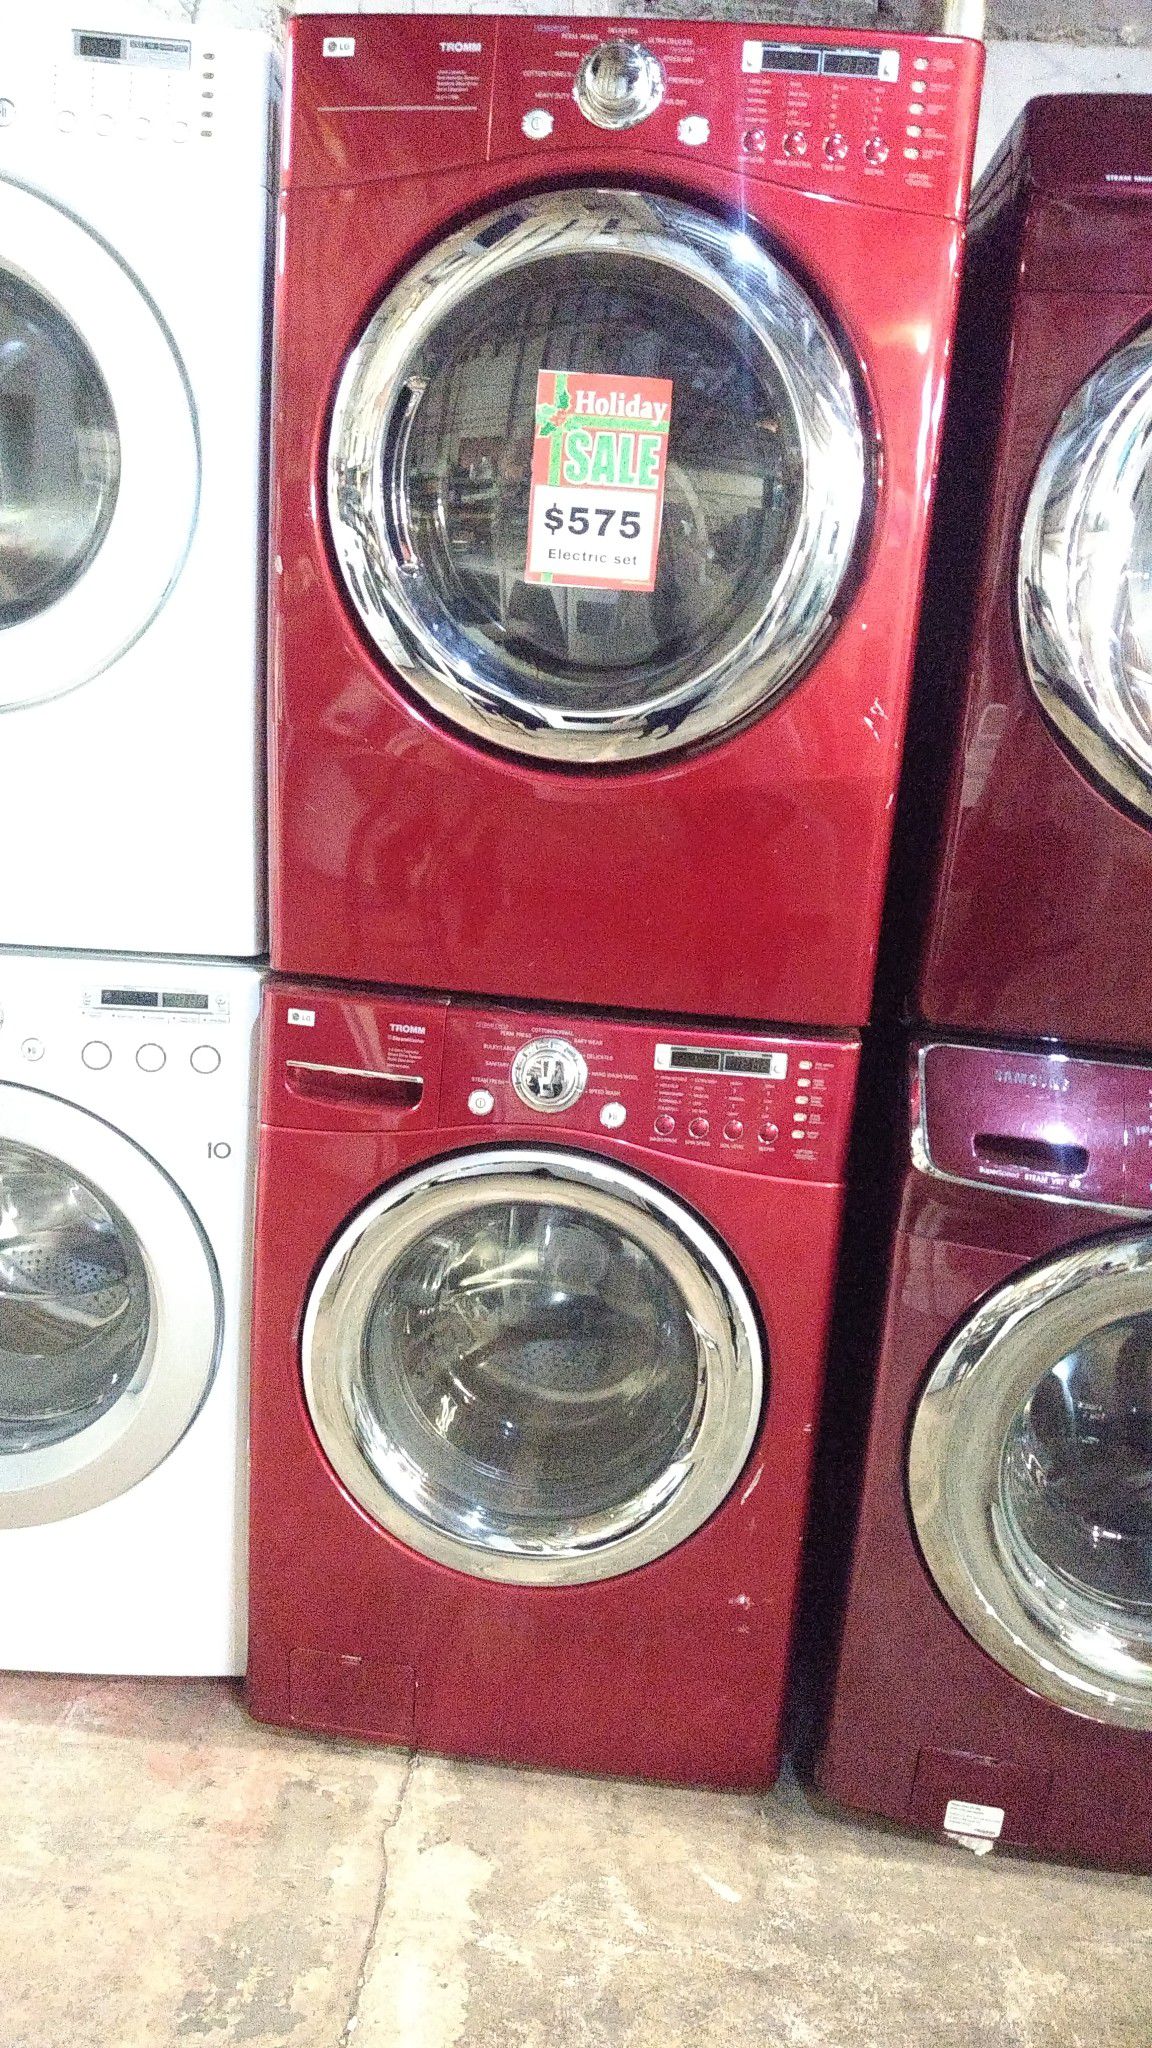 LG front load washer and dryer set working perfectly with 4 months warranty